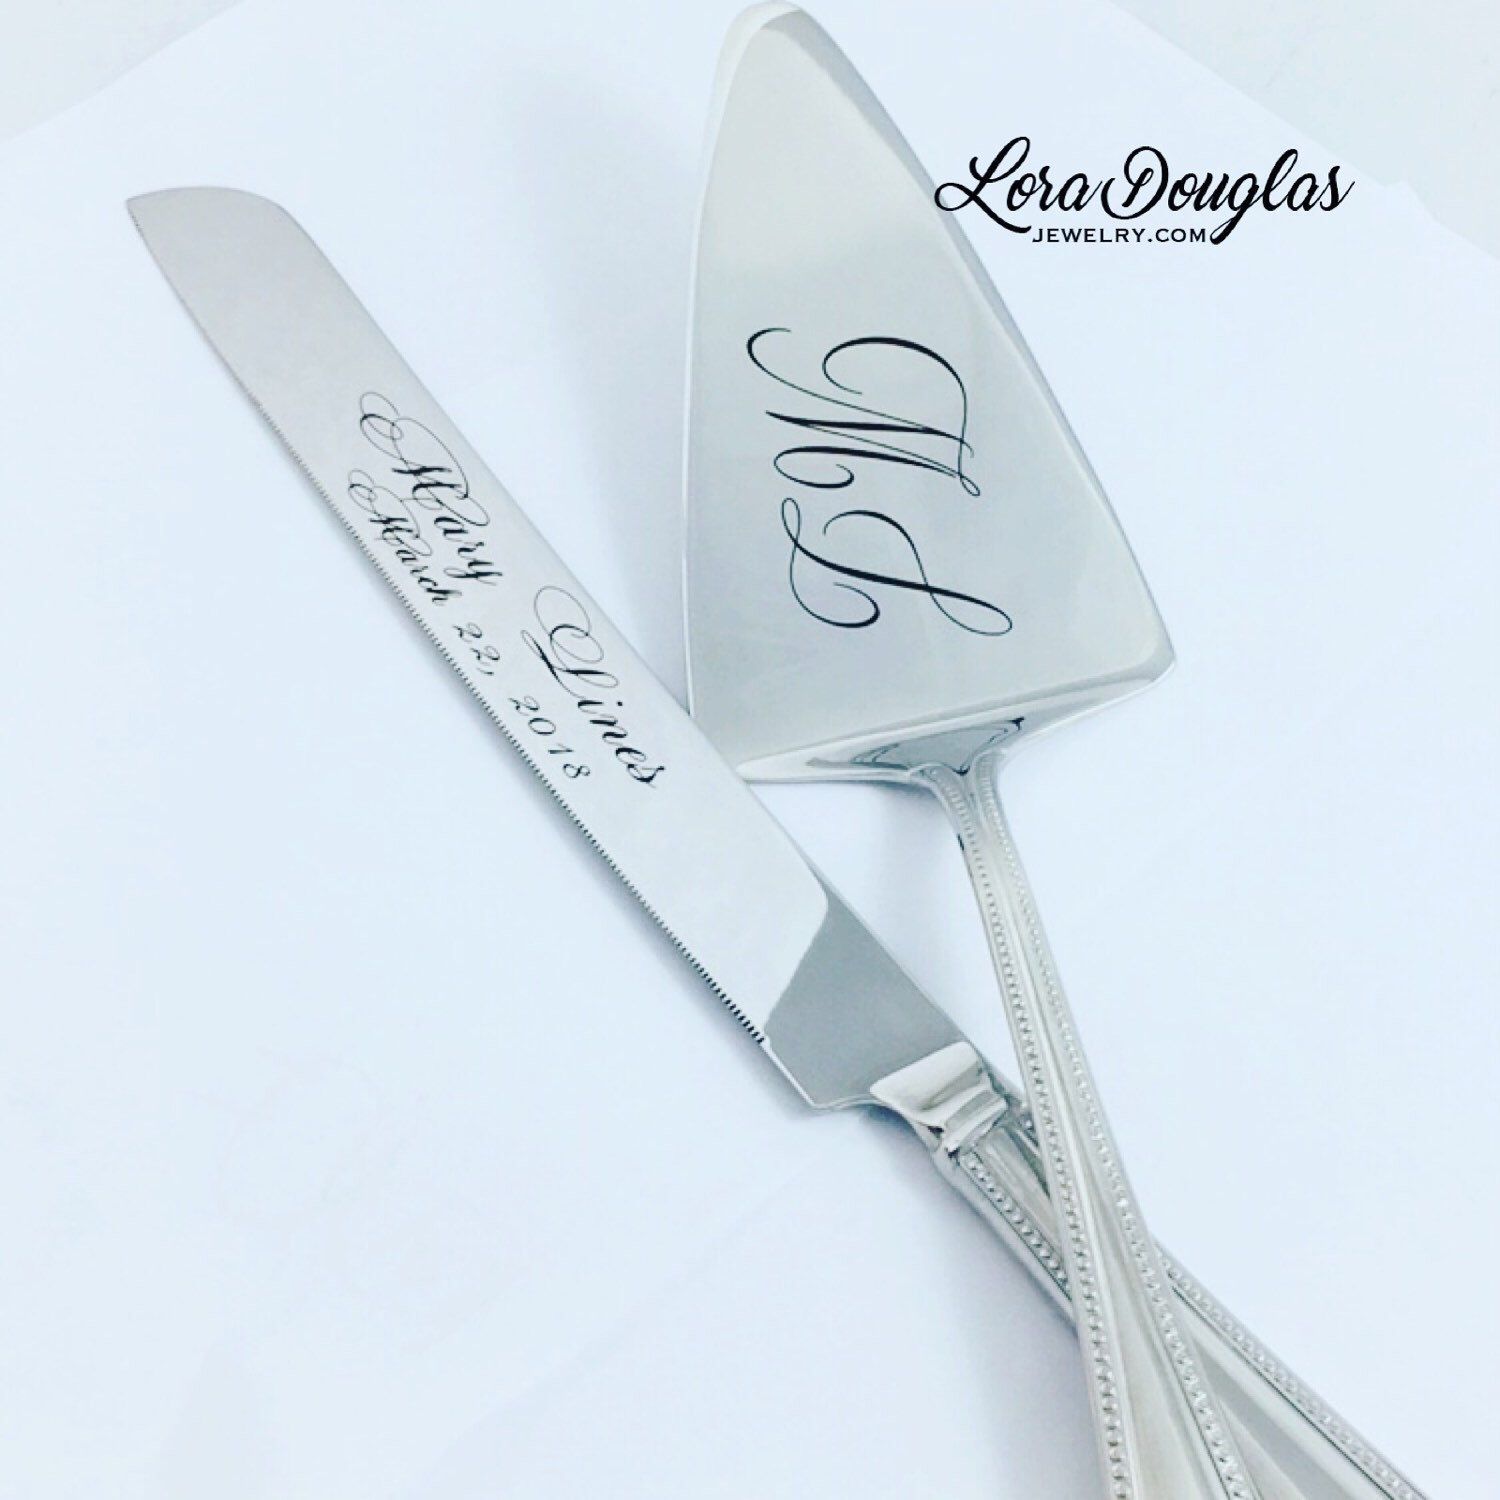 Engraved Birthday &  #Bridal knife sets available in the #Etsy shop # ...